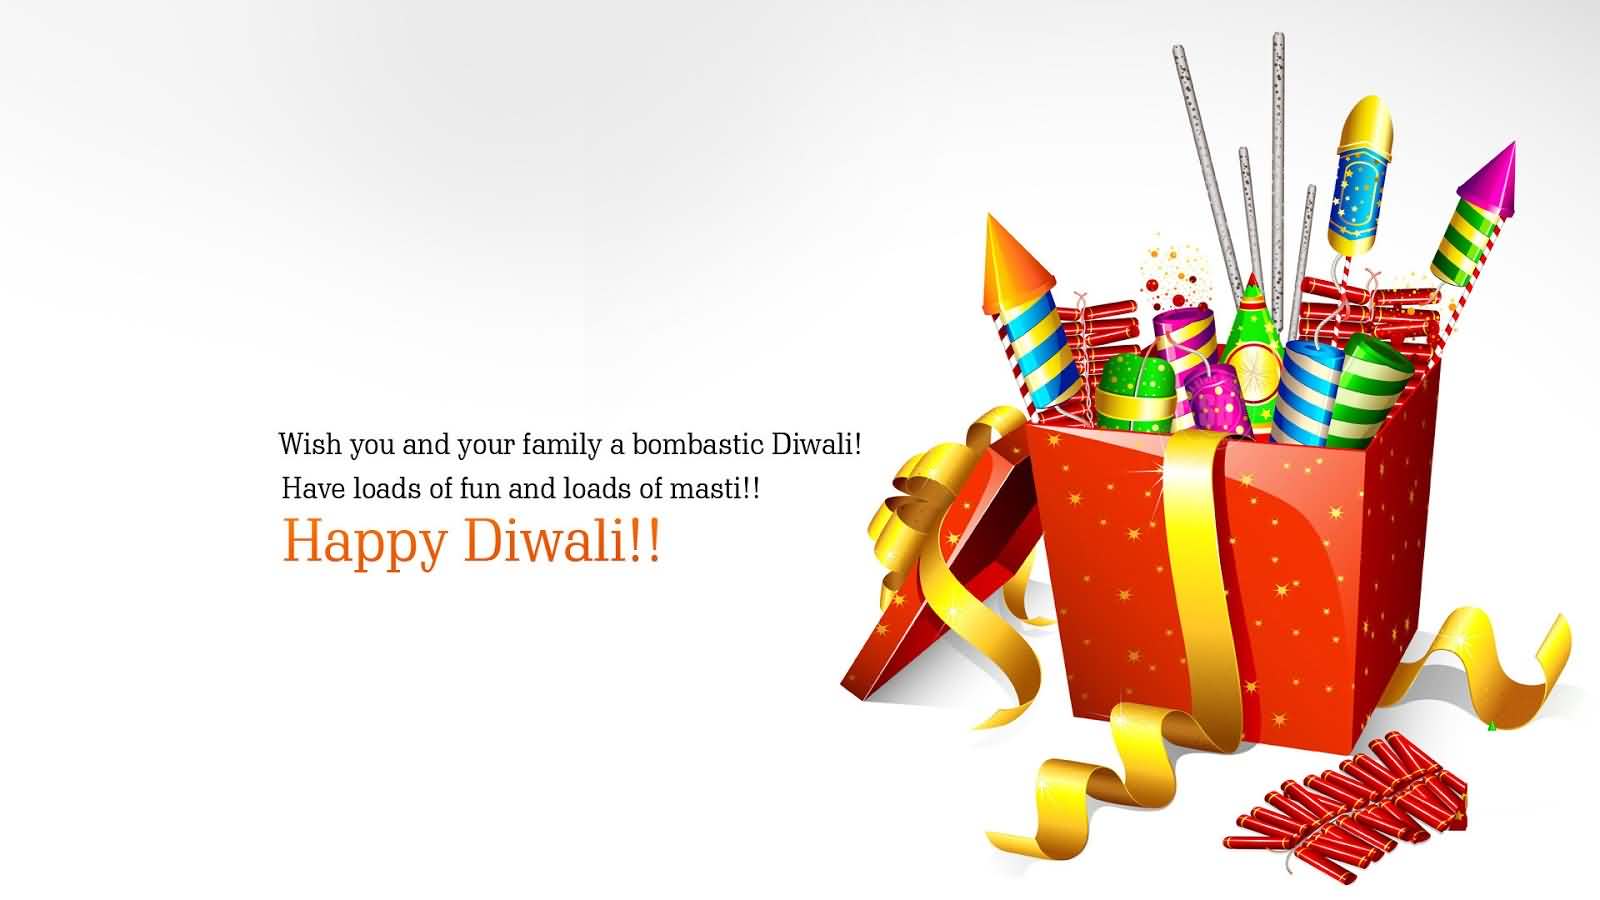 WIsh You And Your Family A Bombastic Diwali Crackers Illustration